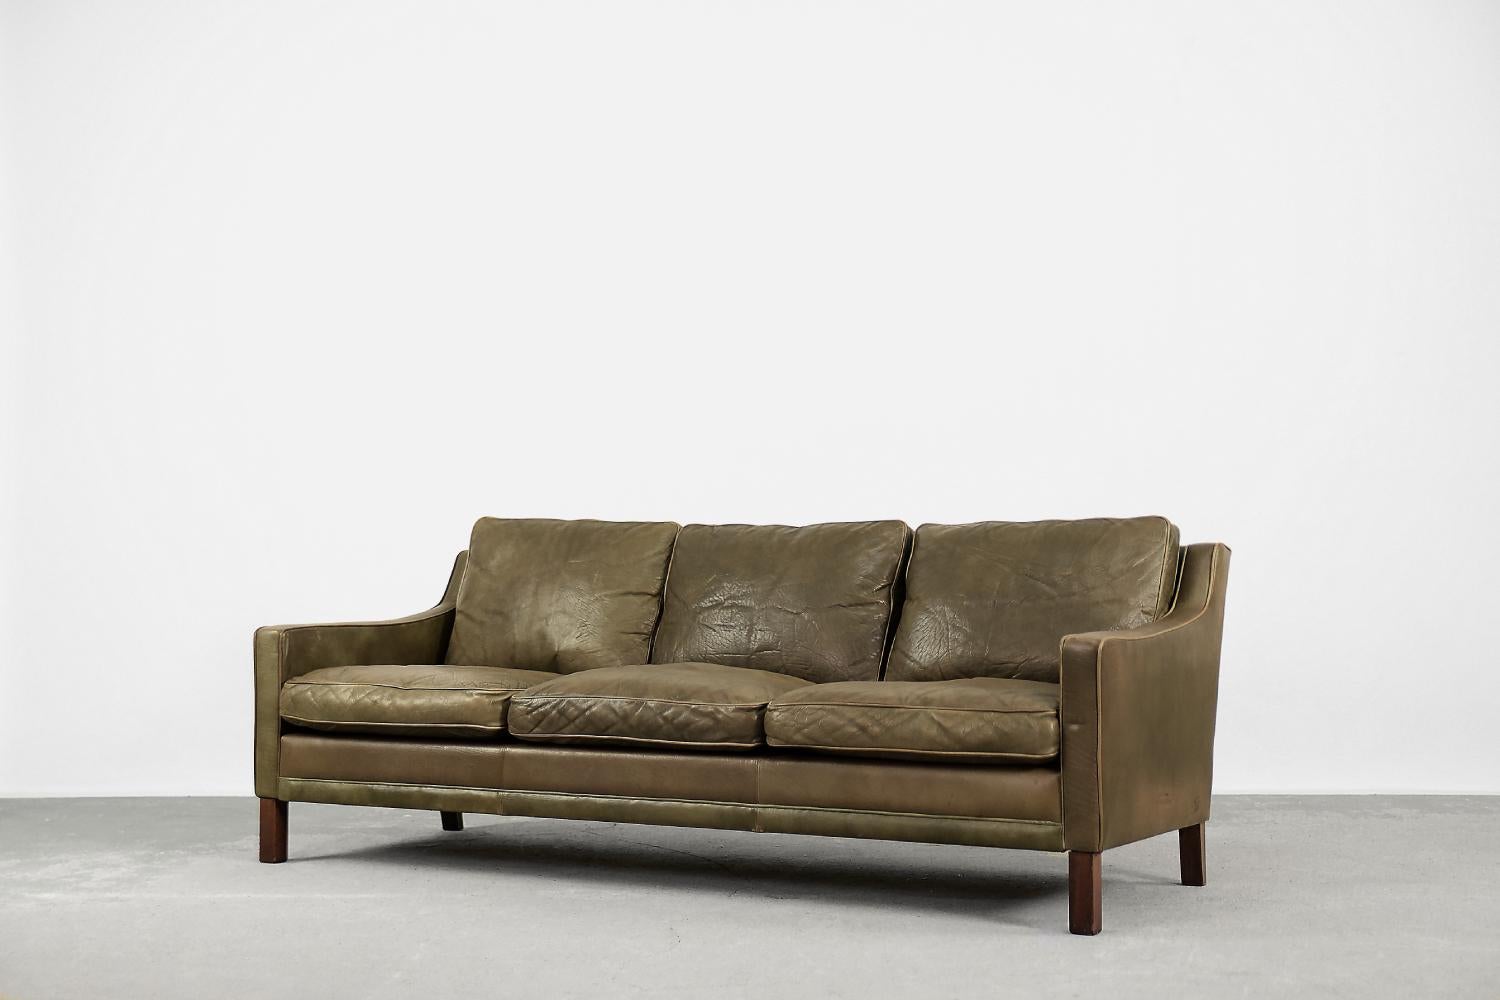 This leather three-seater President sofa was designed by Ingemar Thillmark for the Swedish manufacture OPE Möbler during the 1960s. The modernist frame and six loosely cushions were covered with natural leather in a brown-earthy color with a natural